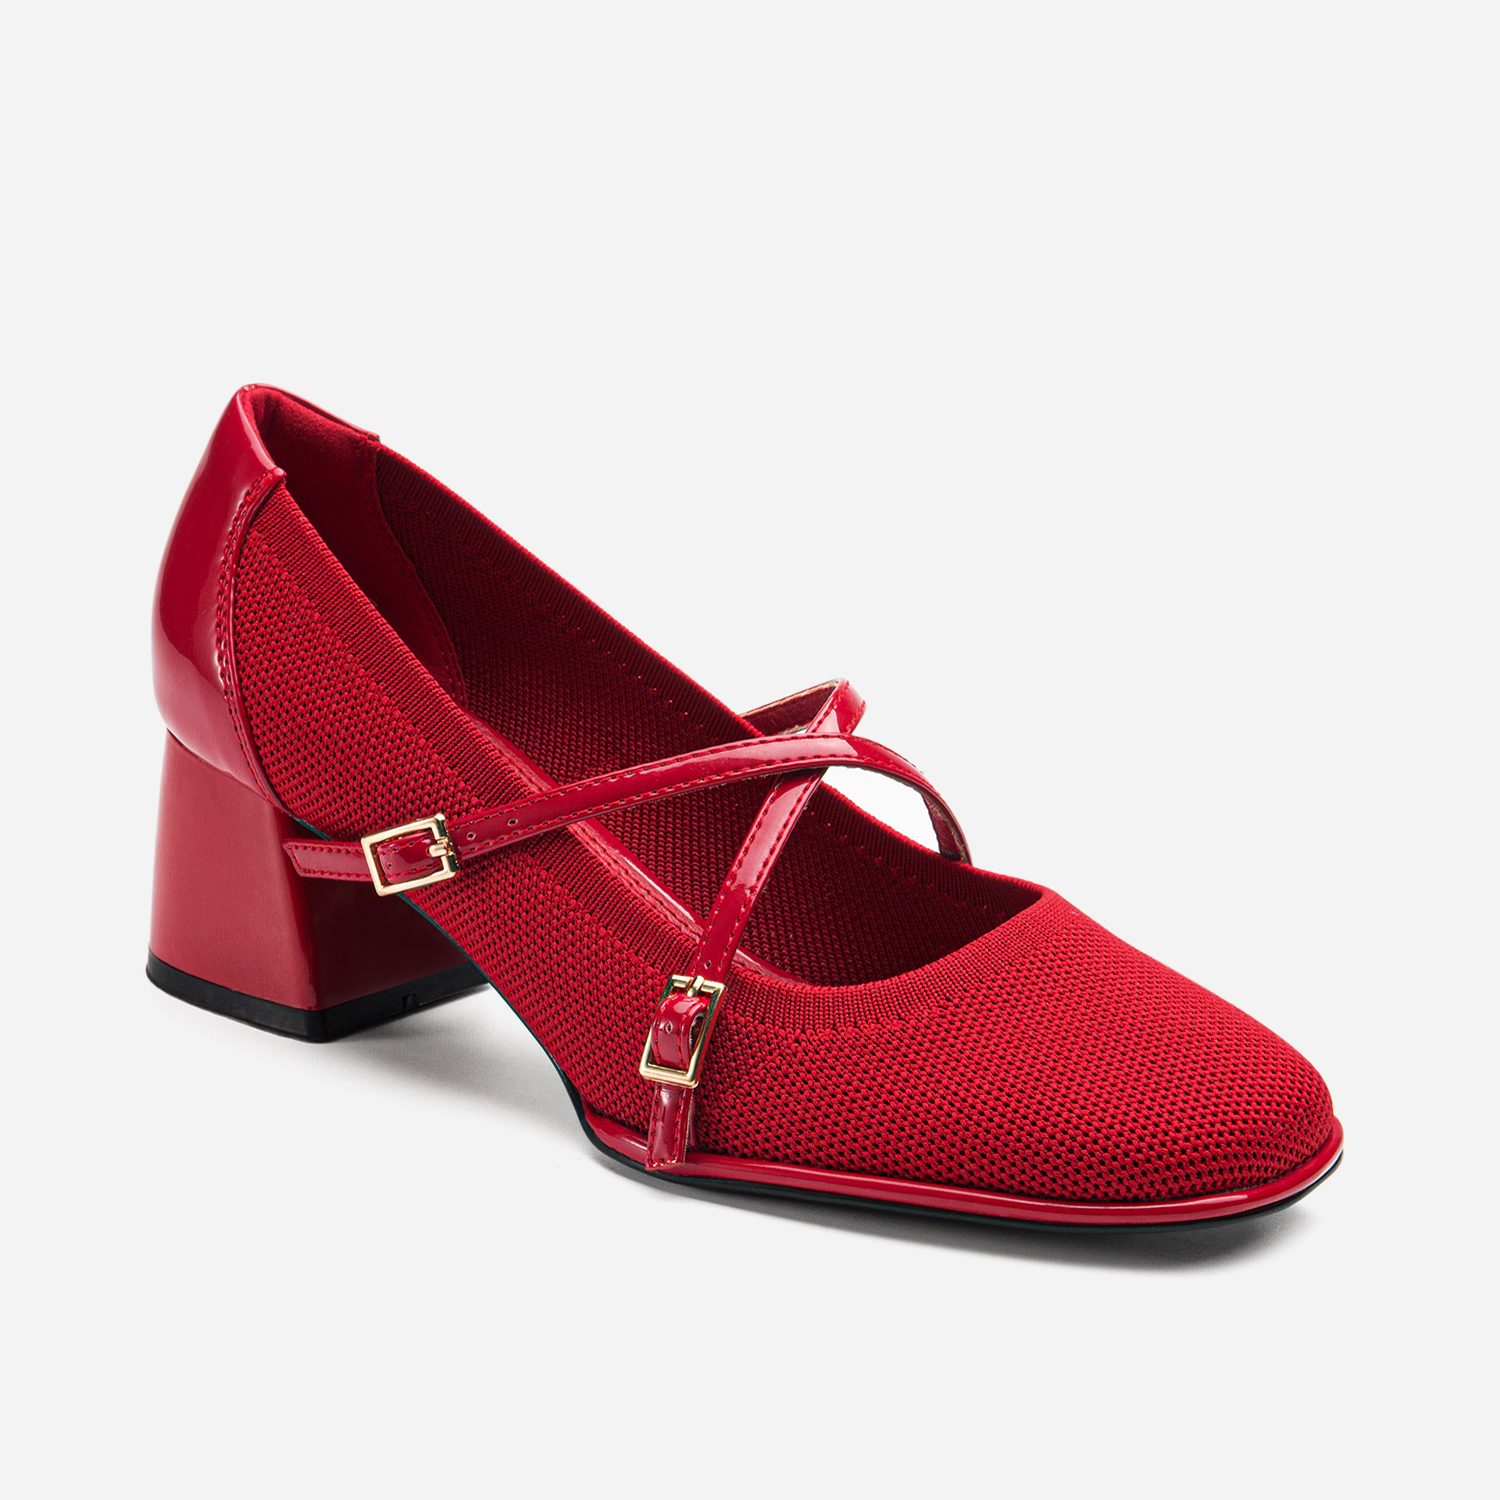 MOUSSE FIT Commute Square Toe Heeled Mary Janes